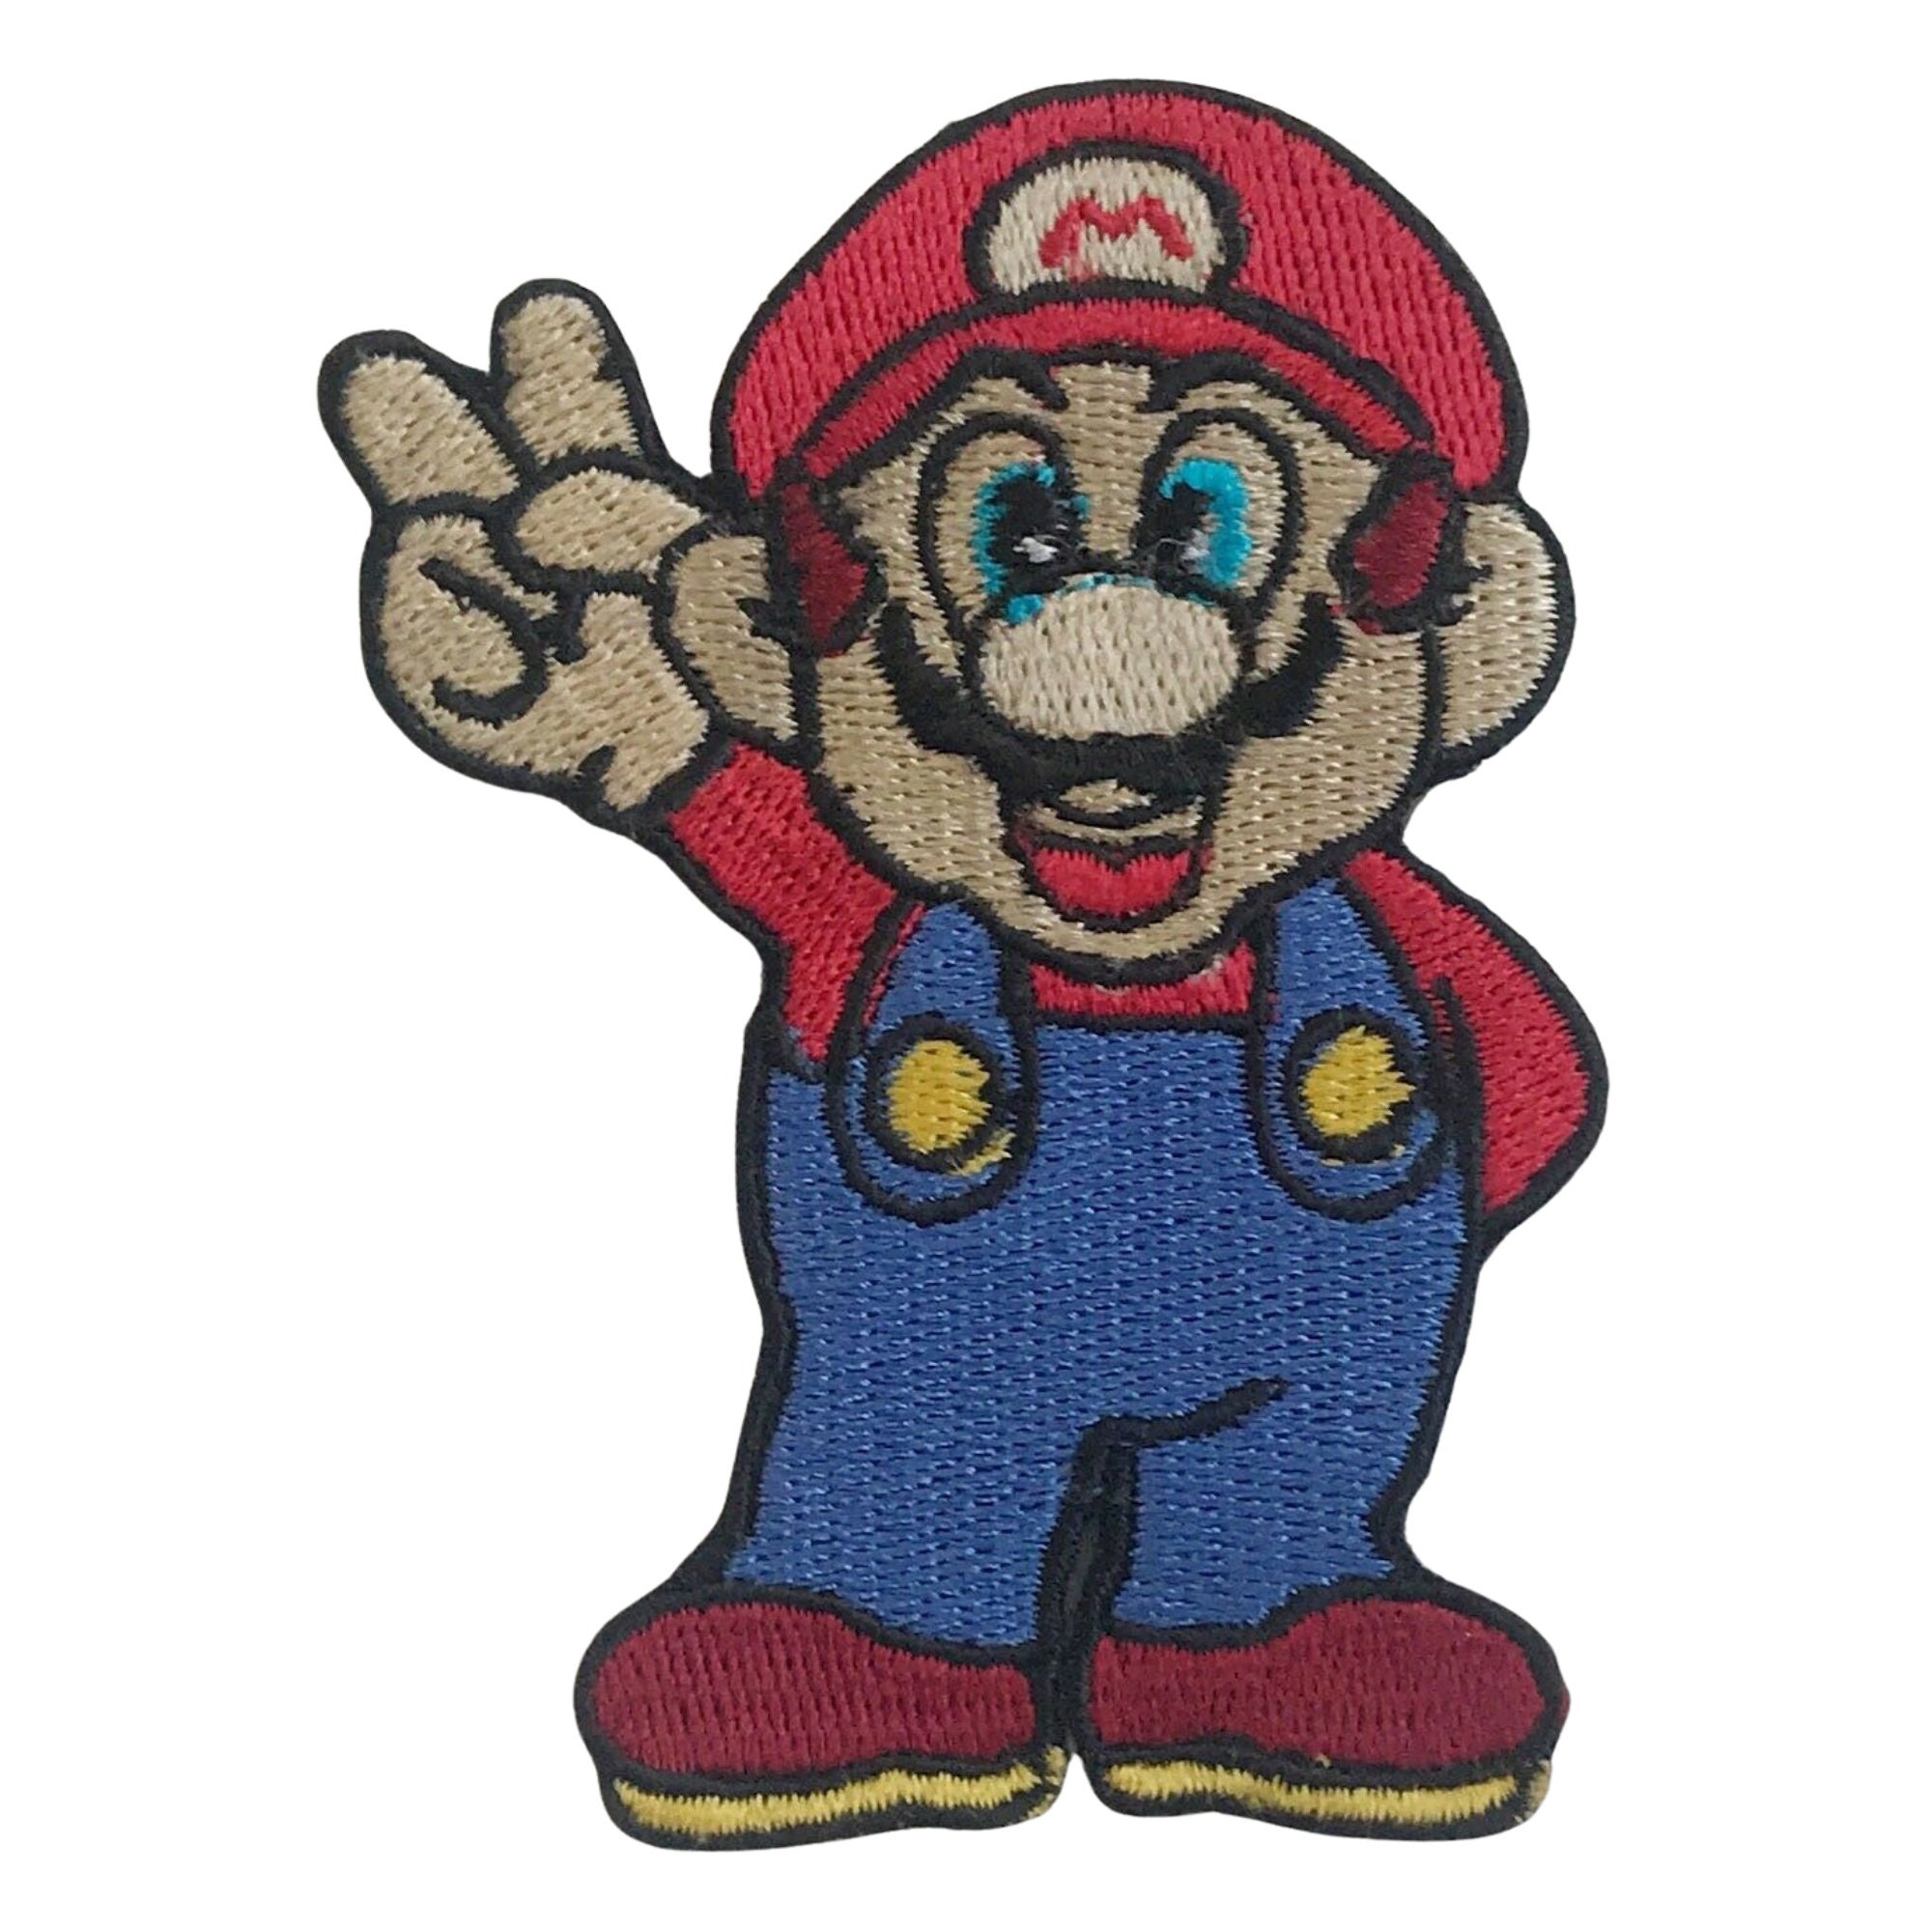 Iron on patches - mushroom Super Mario - red - 7.1x7.6cm - Application  badges